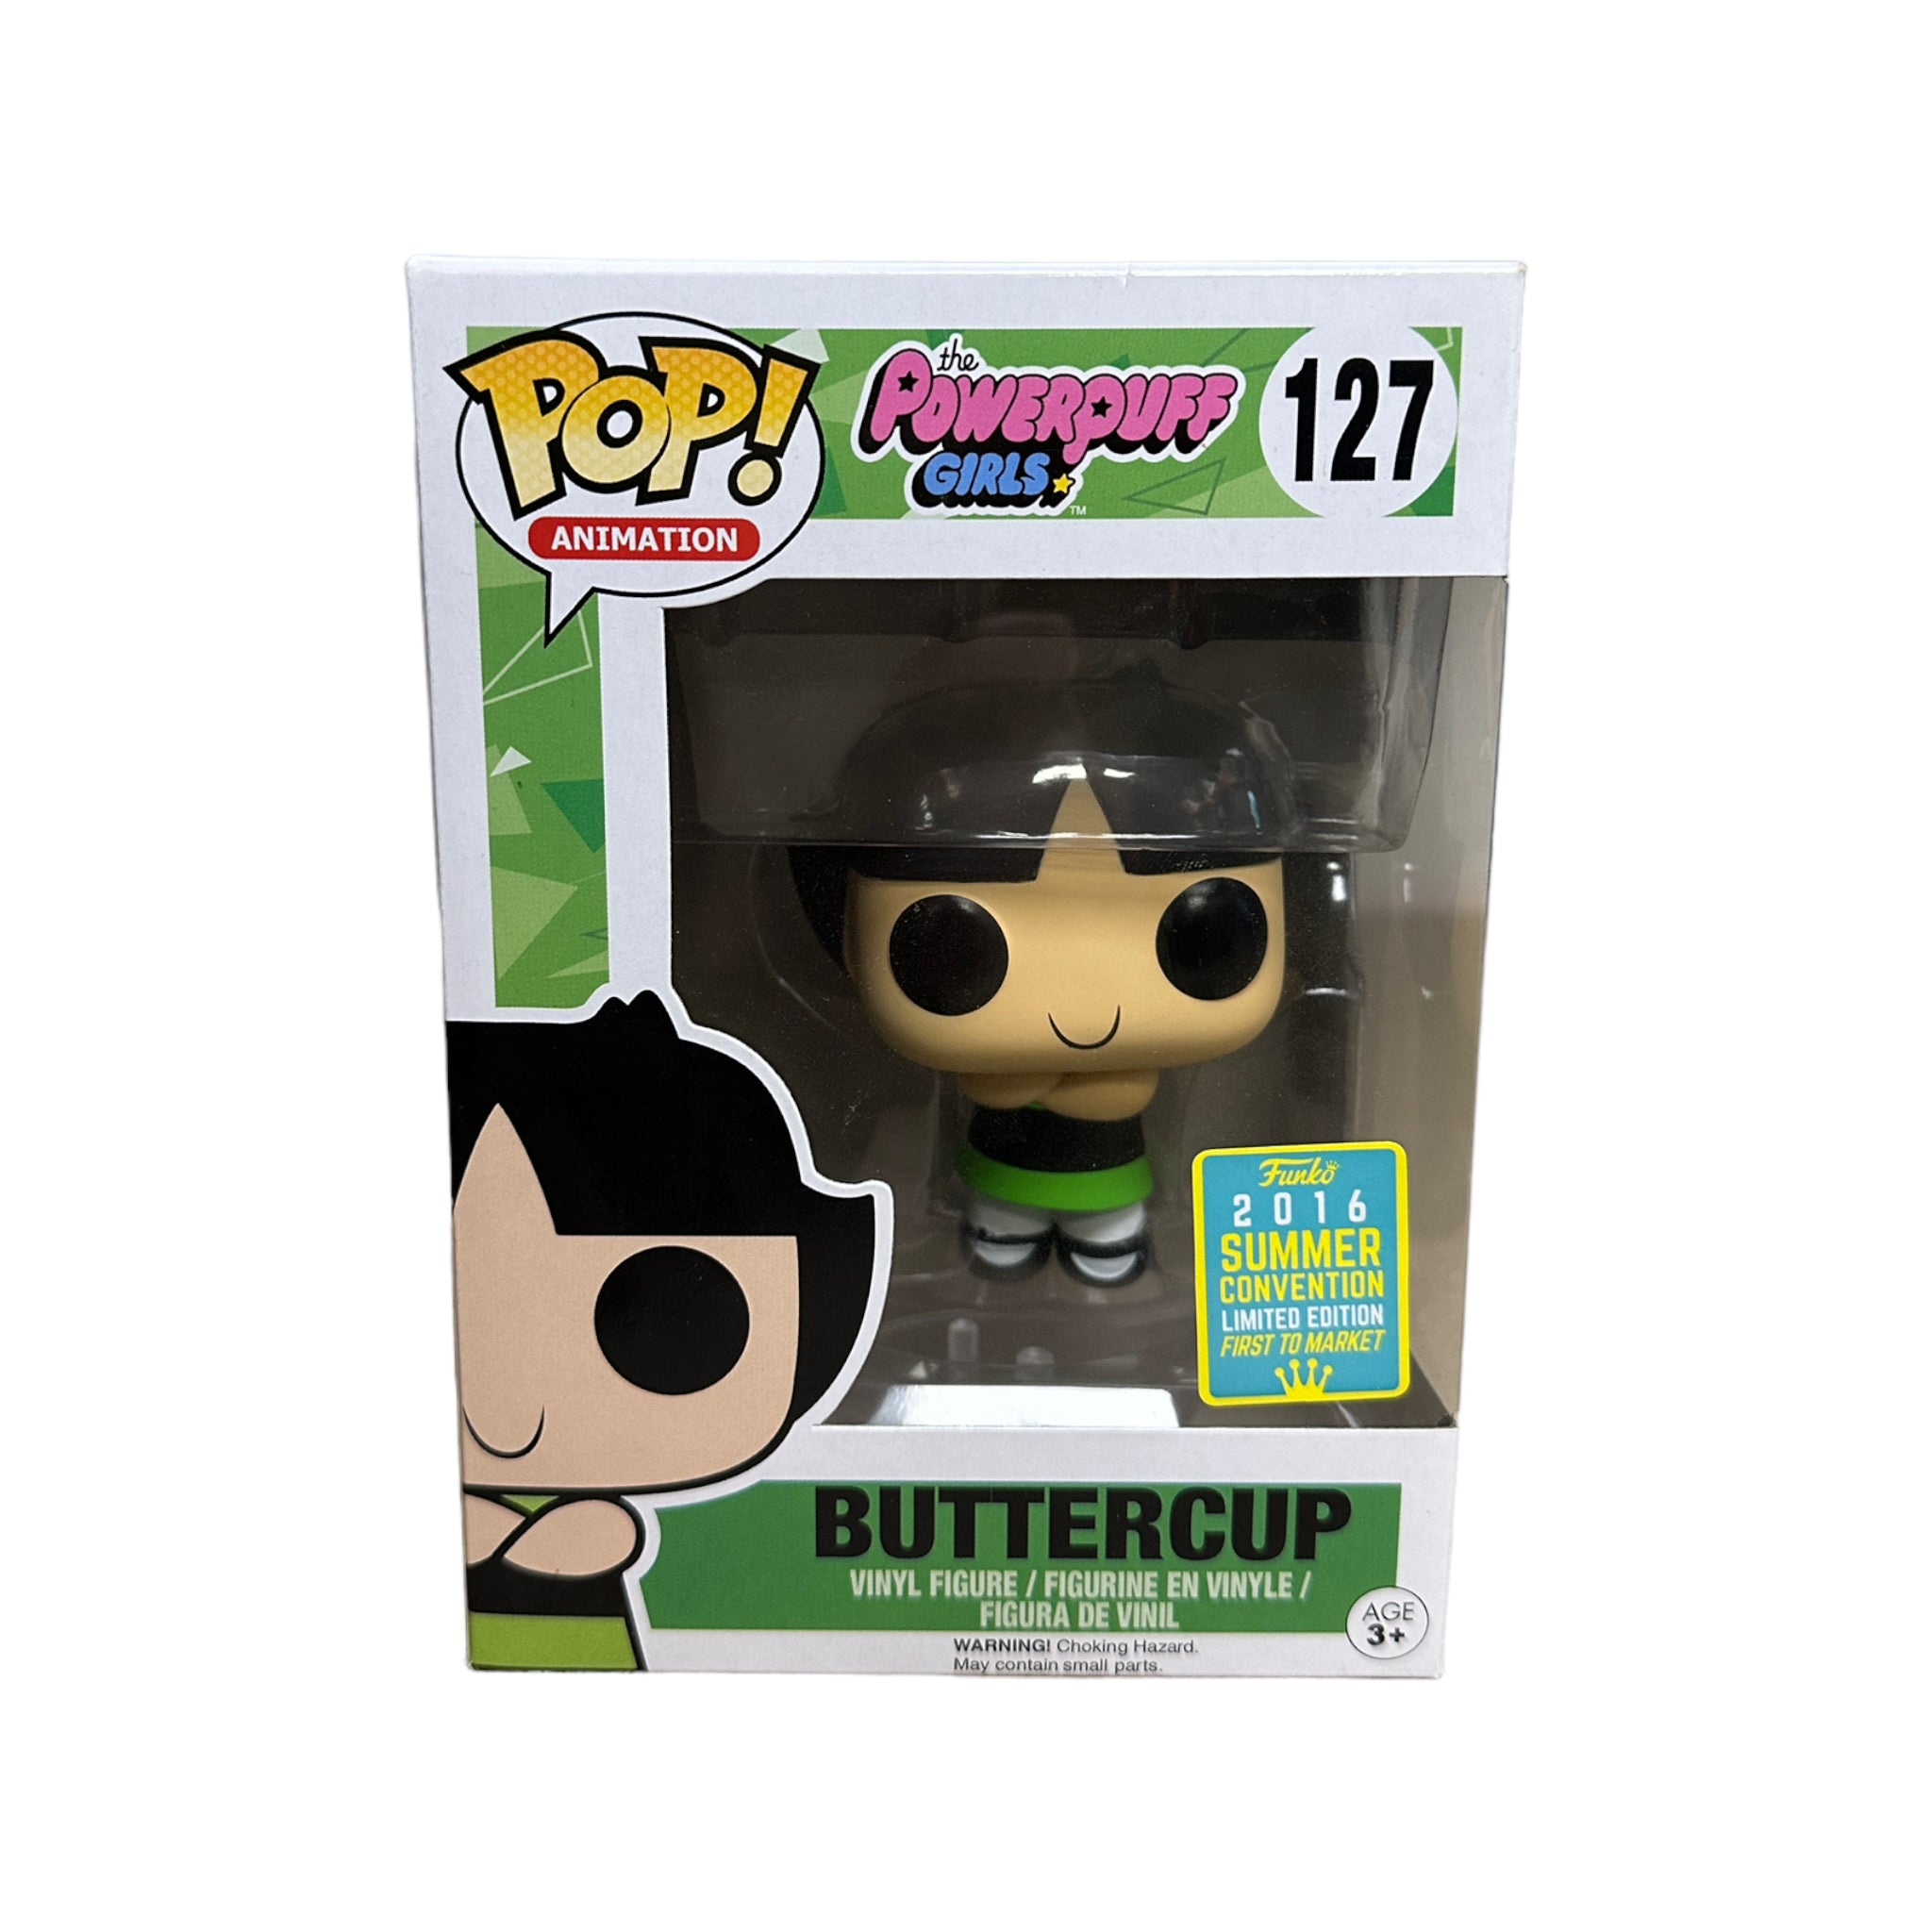 Buttercup #127 Funko Pop! - The Powerpuff Girls - SDCC 2016 Shared First To Market Exclusive - Condition 8.5/10